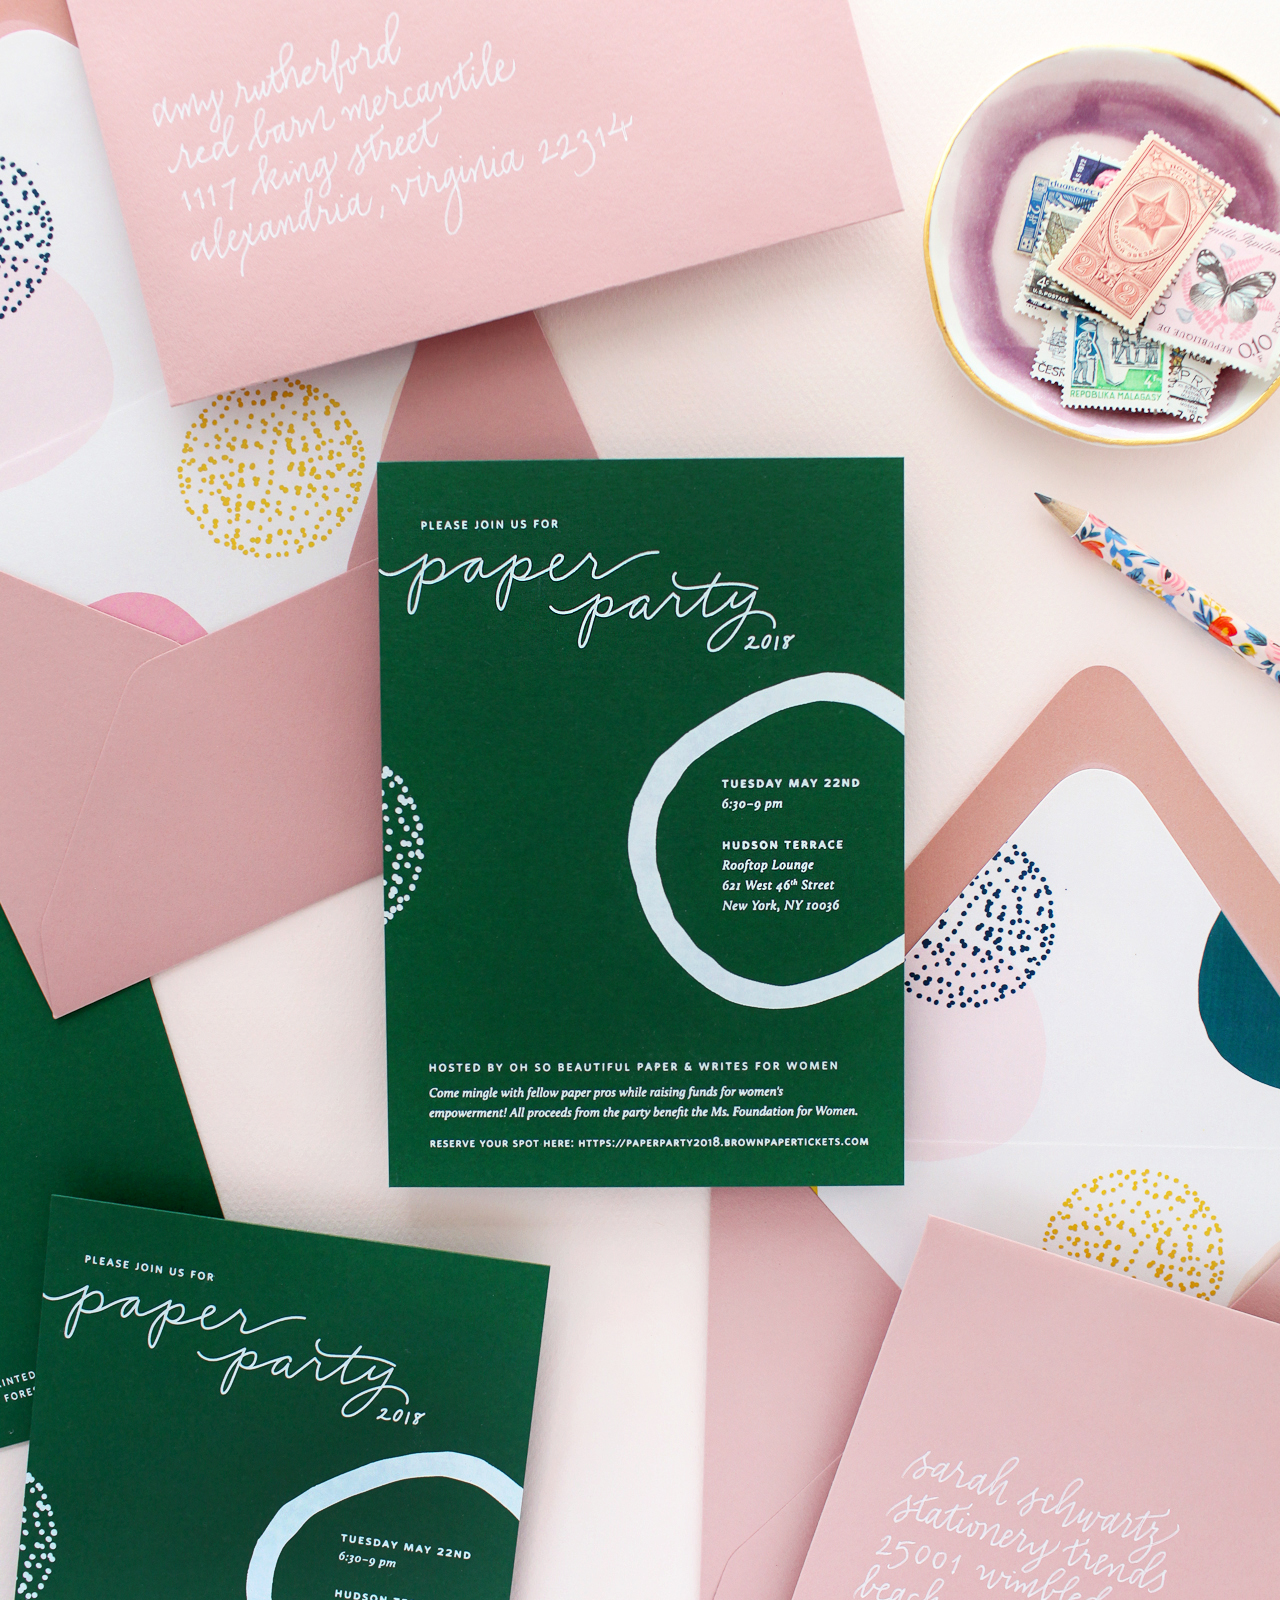 Paper Party 2018 Invitations on Colorplan Forest Green Paper